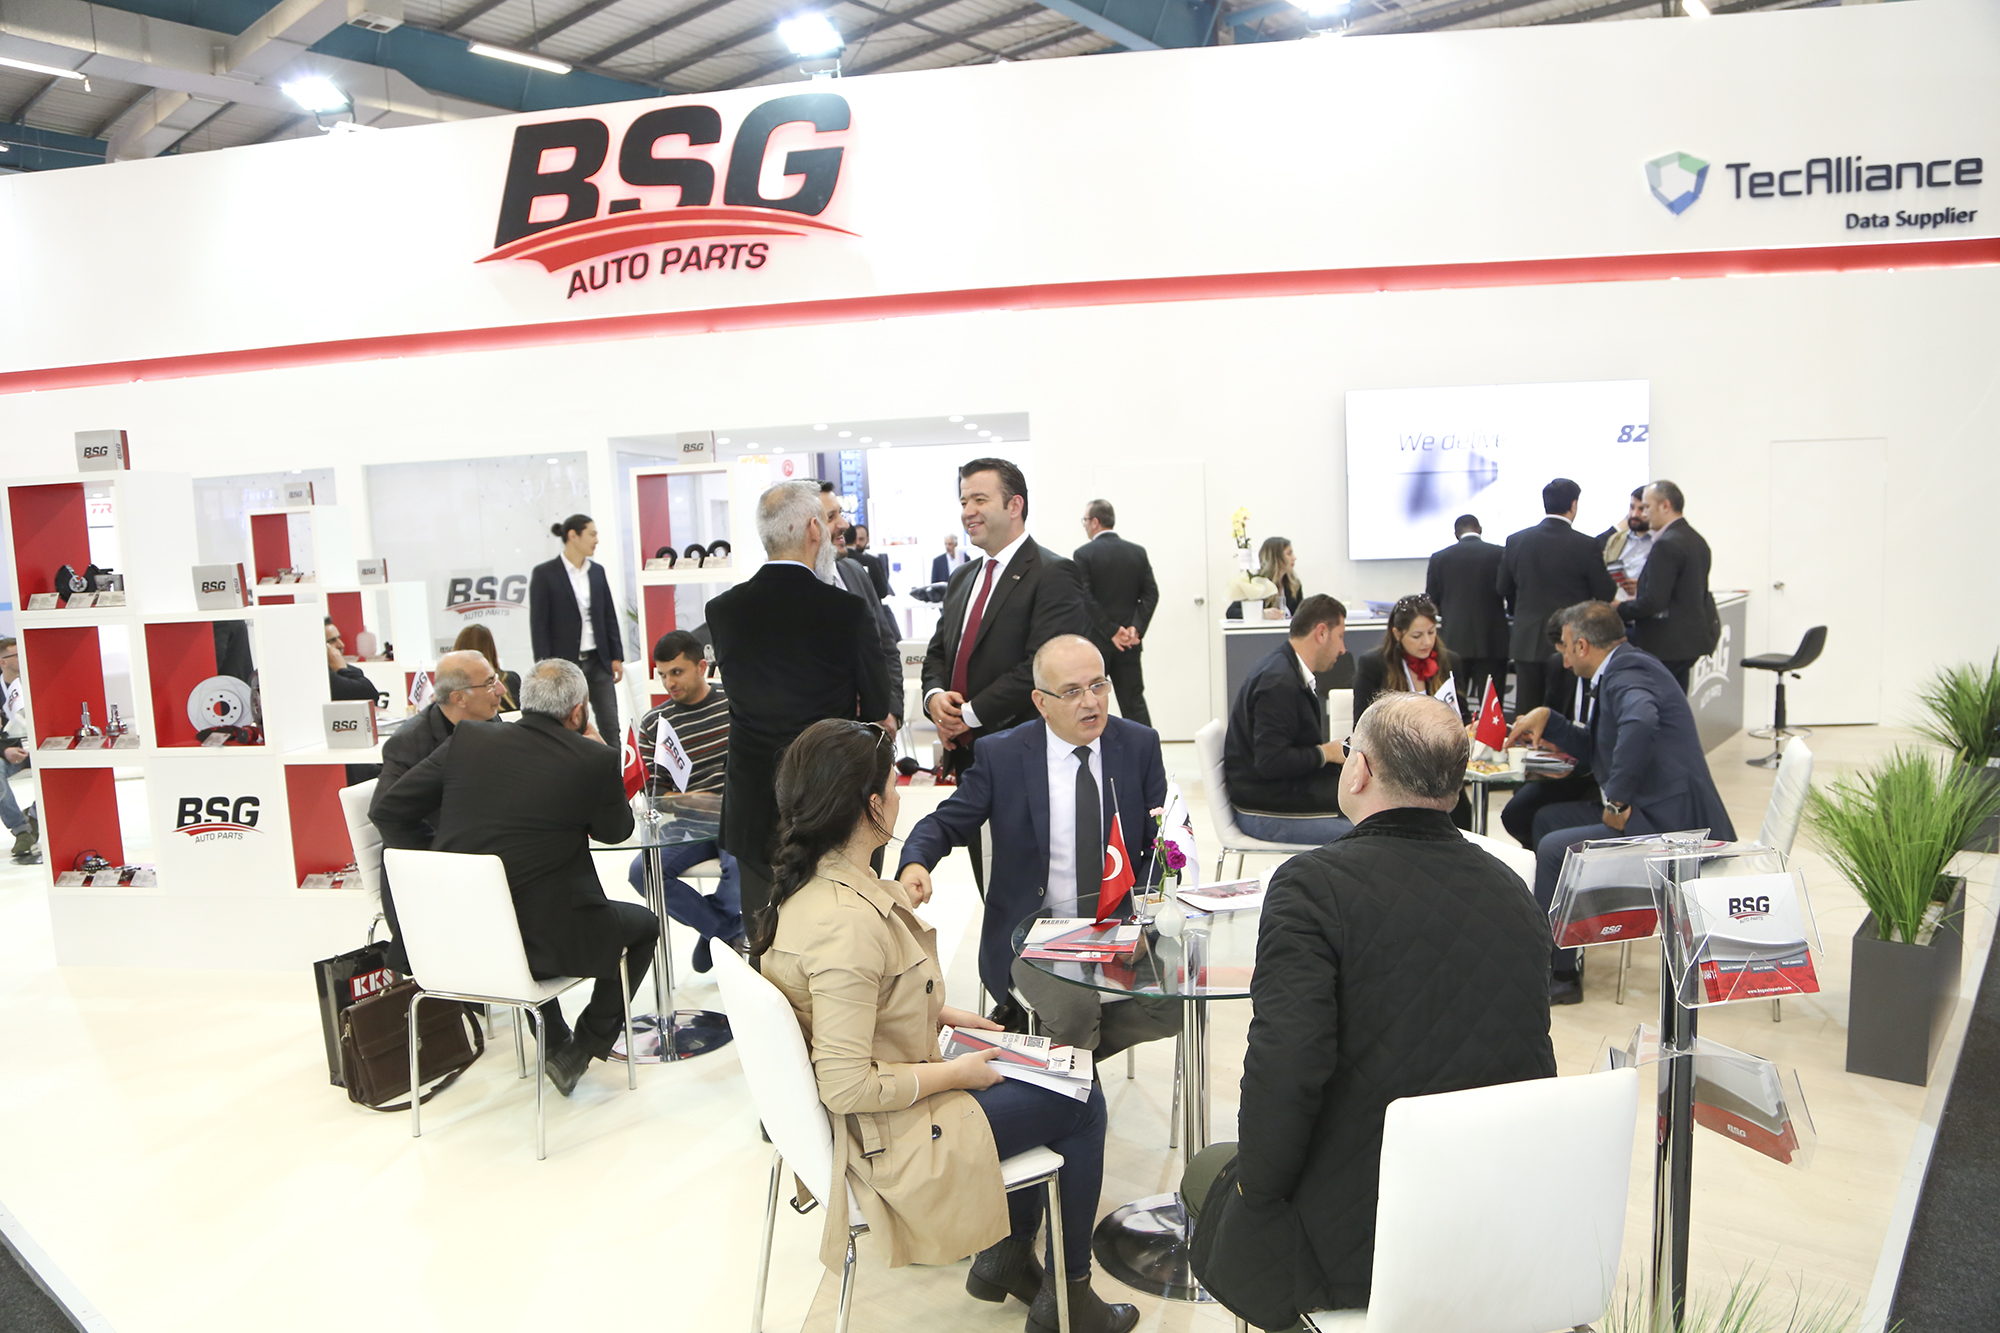 <p>BSG Auto Parts in Automechanika Istanbul 2018 was finished with very high participation. Was one of the focal point forfor both, it's stand design and participants also  activities carried out. BSG Auto Parts brand hosted guests  from Turkey even from many countries  of the world with the participants showed great appreciation and interest.</p>

<p>With over 13.000 product references, the brand brings together quality and reliable products from 5 countries in the world with its existing and potential business partners; efficient and effective interviews was made.</p>